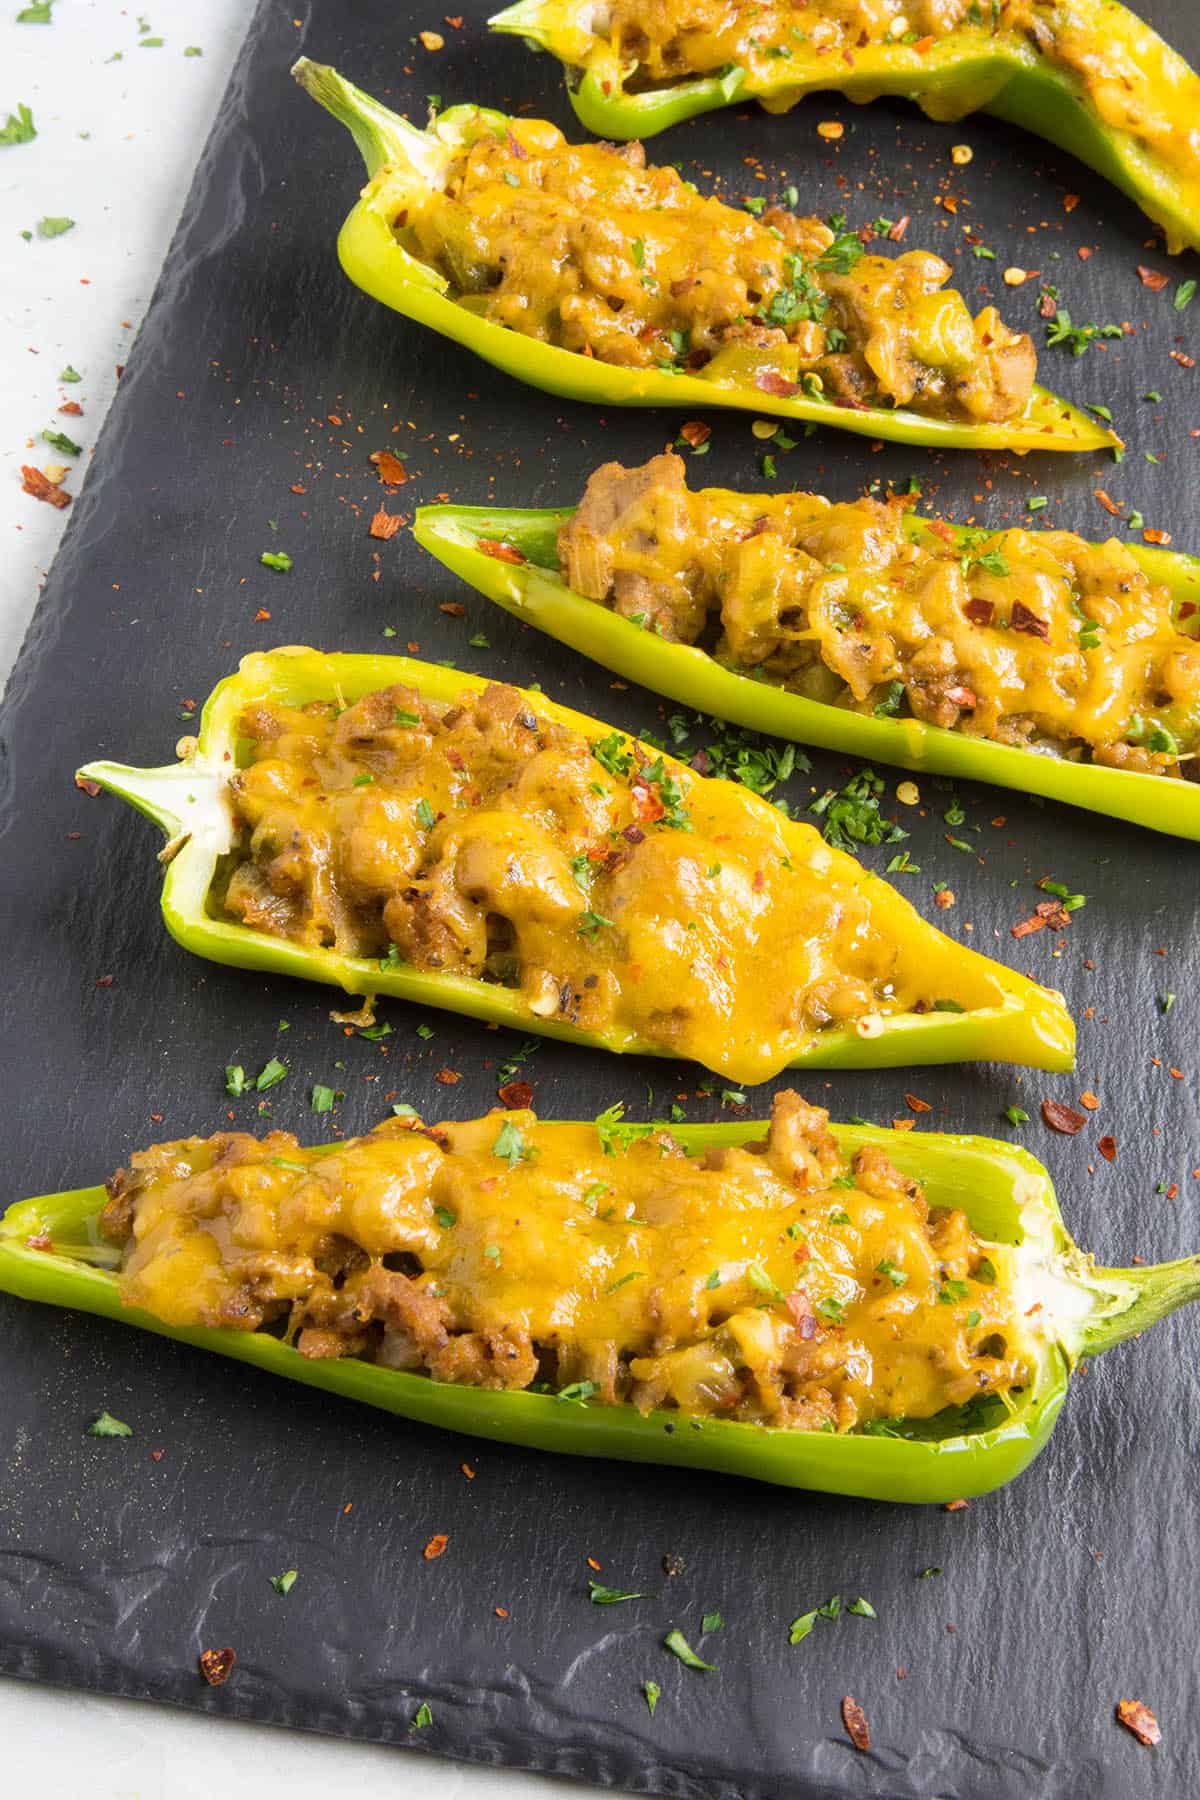 Turkey and Cheddar Stuffed Anaheim Peppers, ready to serve